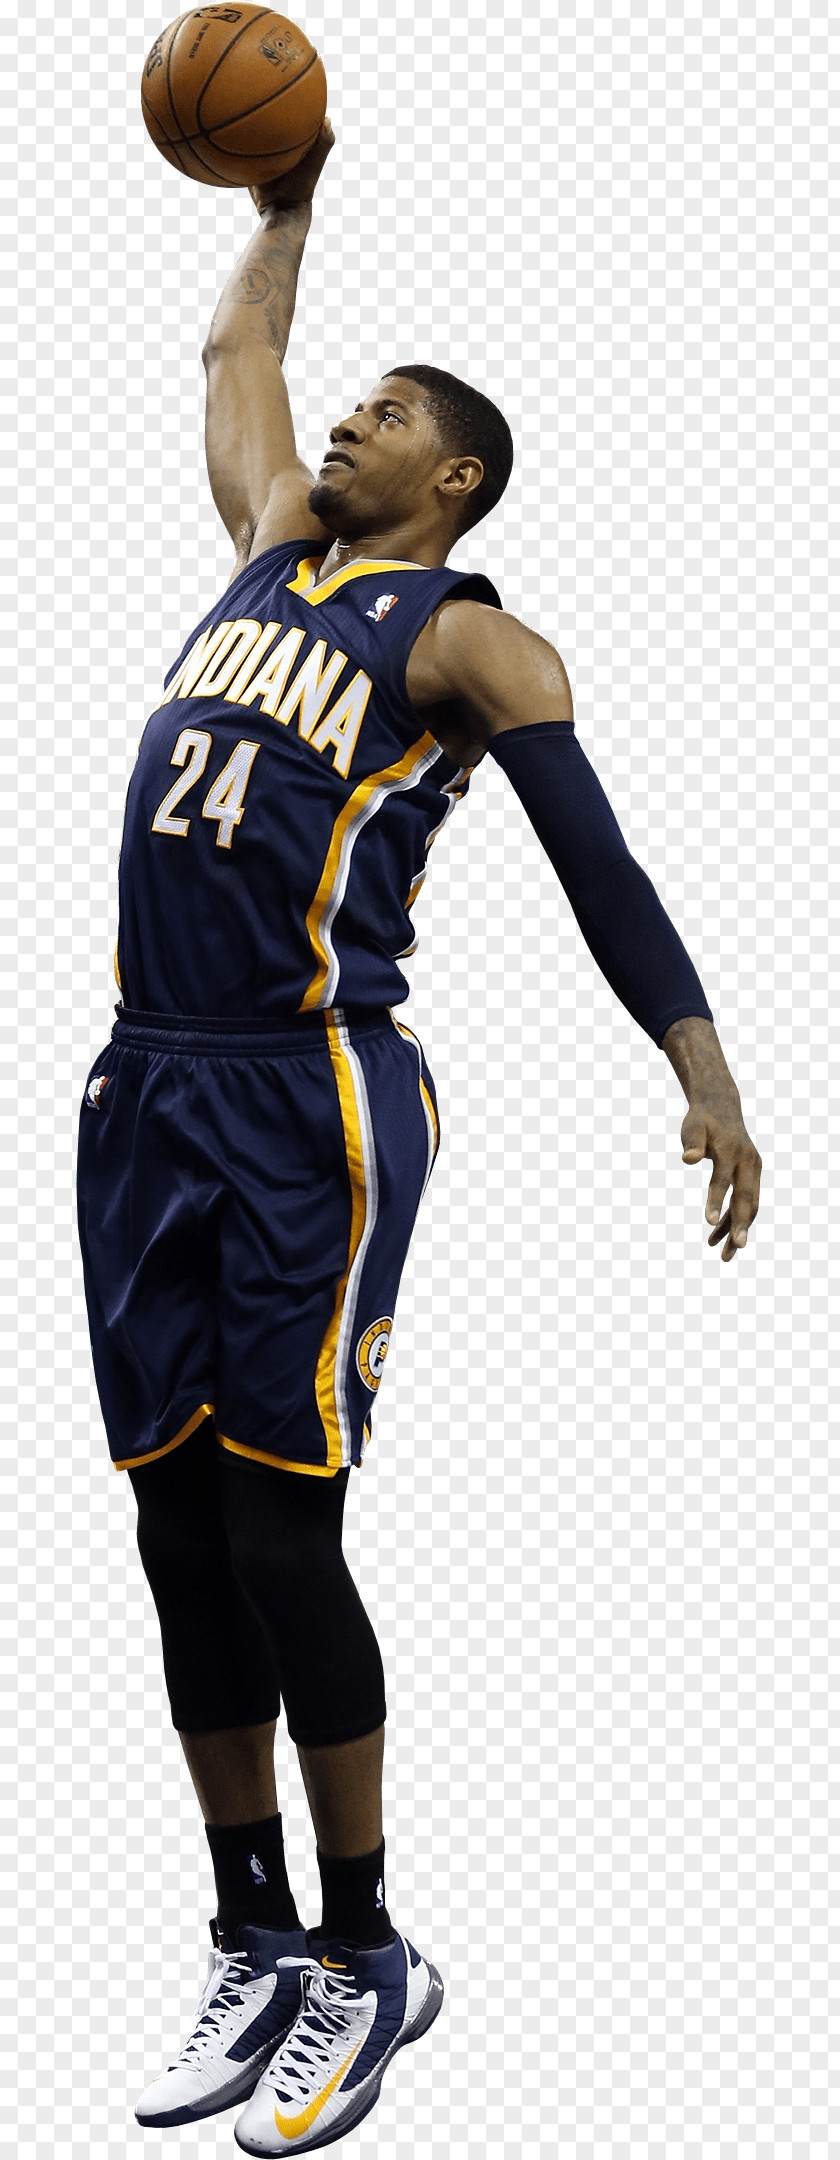 Sports Personal Paul George Indiana Pacers Basketball Slam Dunk PNG